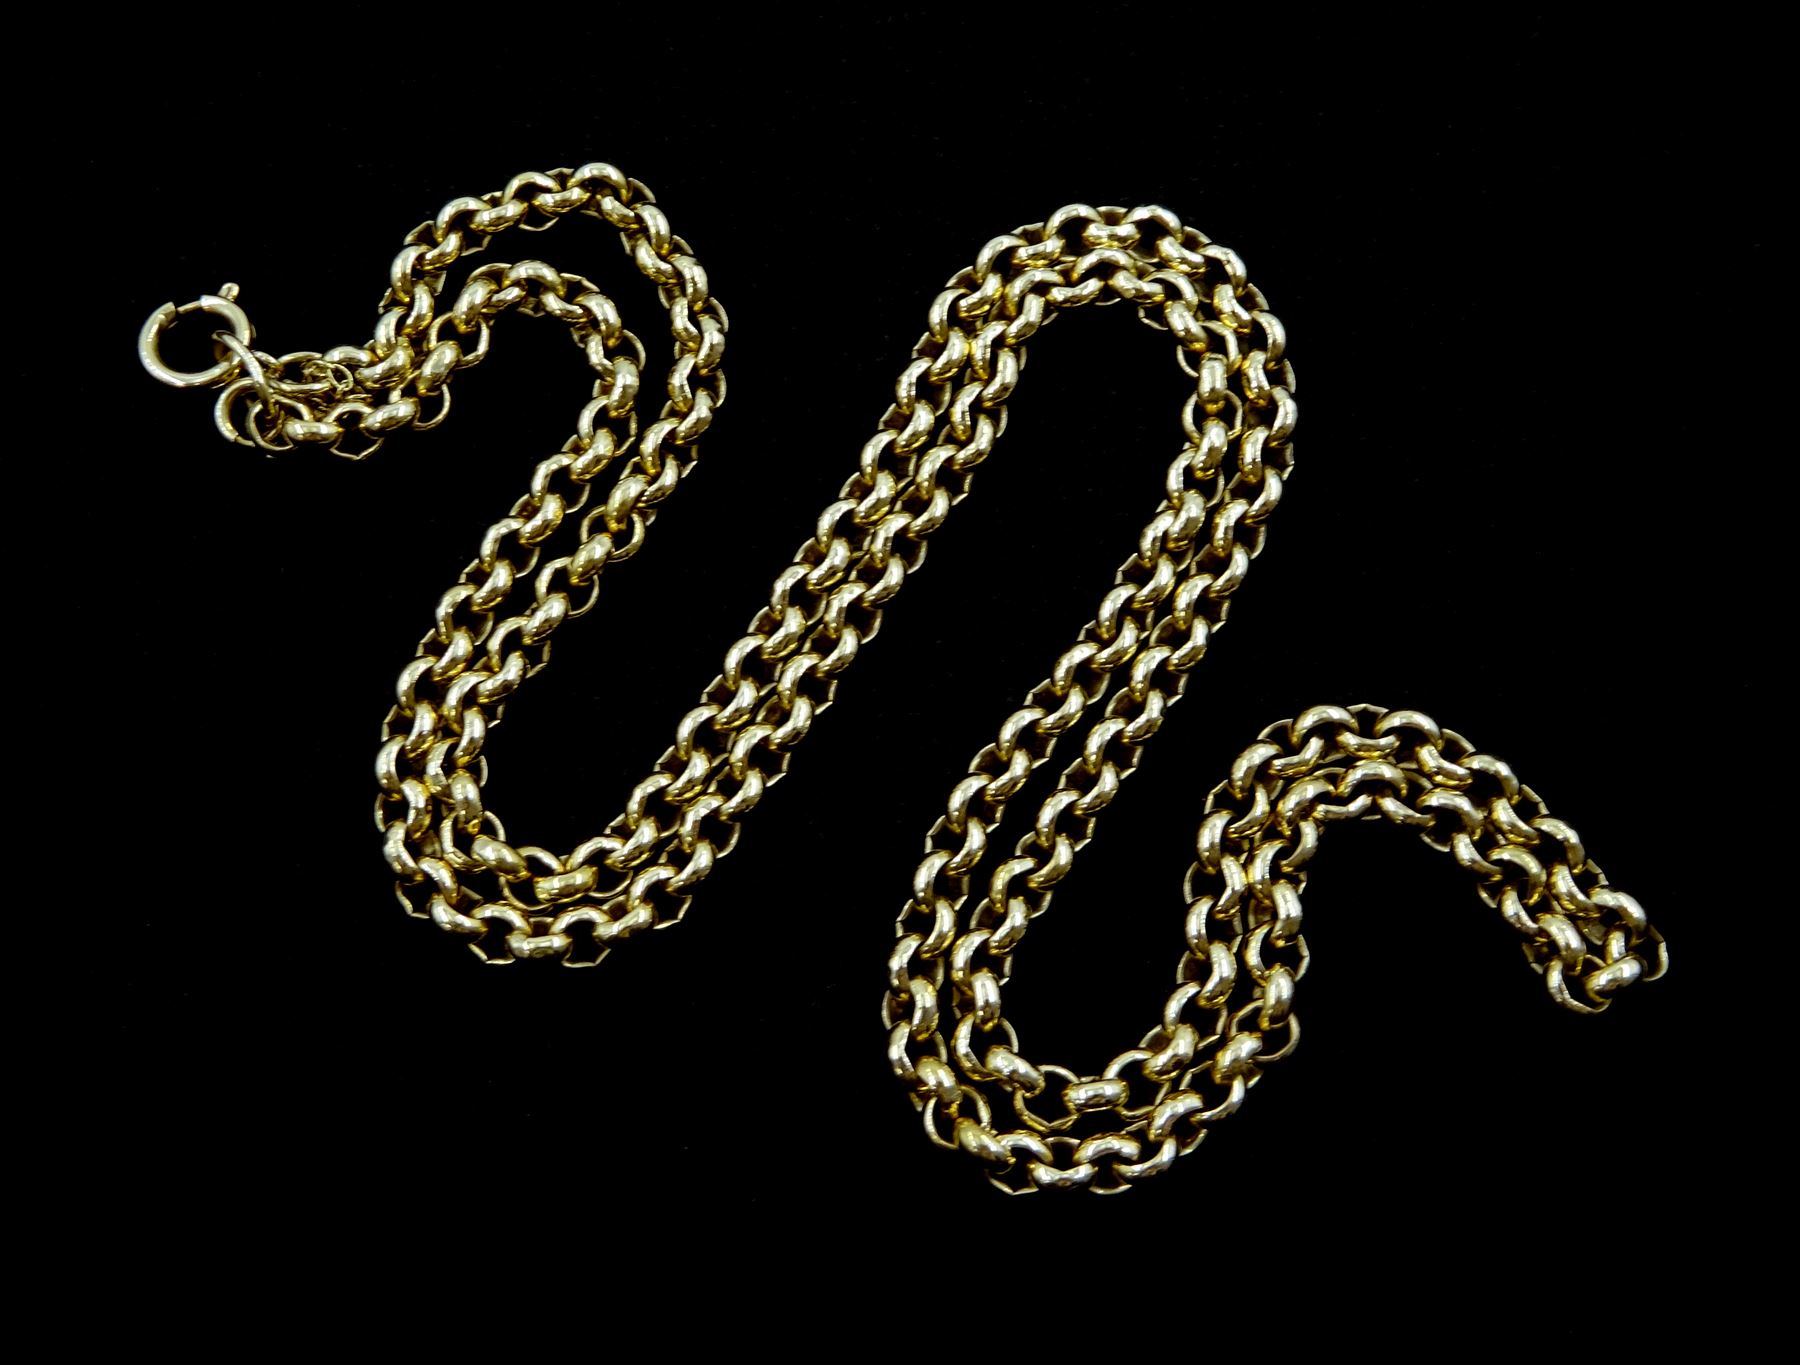 9ct gold Rolo link necklace - Image 2 of 2